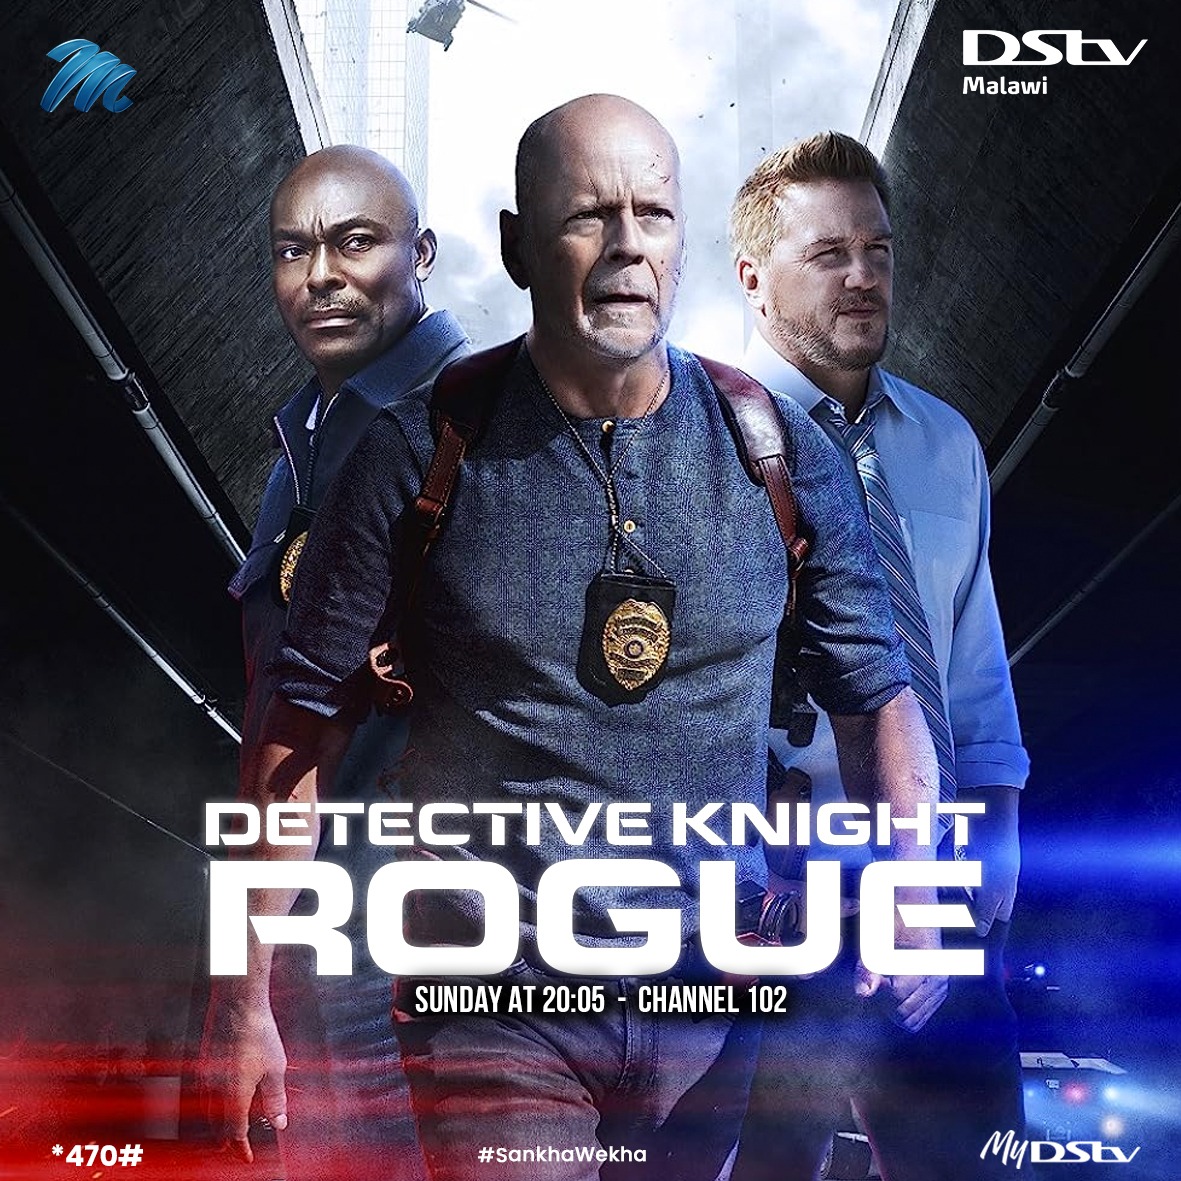 Catch Bruce Willis in action tonight in Detective Knight: Rogue on #MNet102. #SundayNightMovie